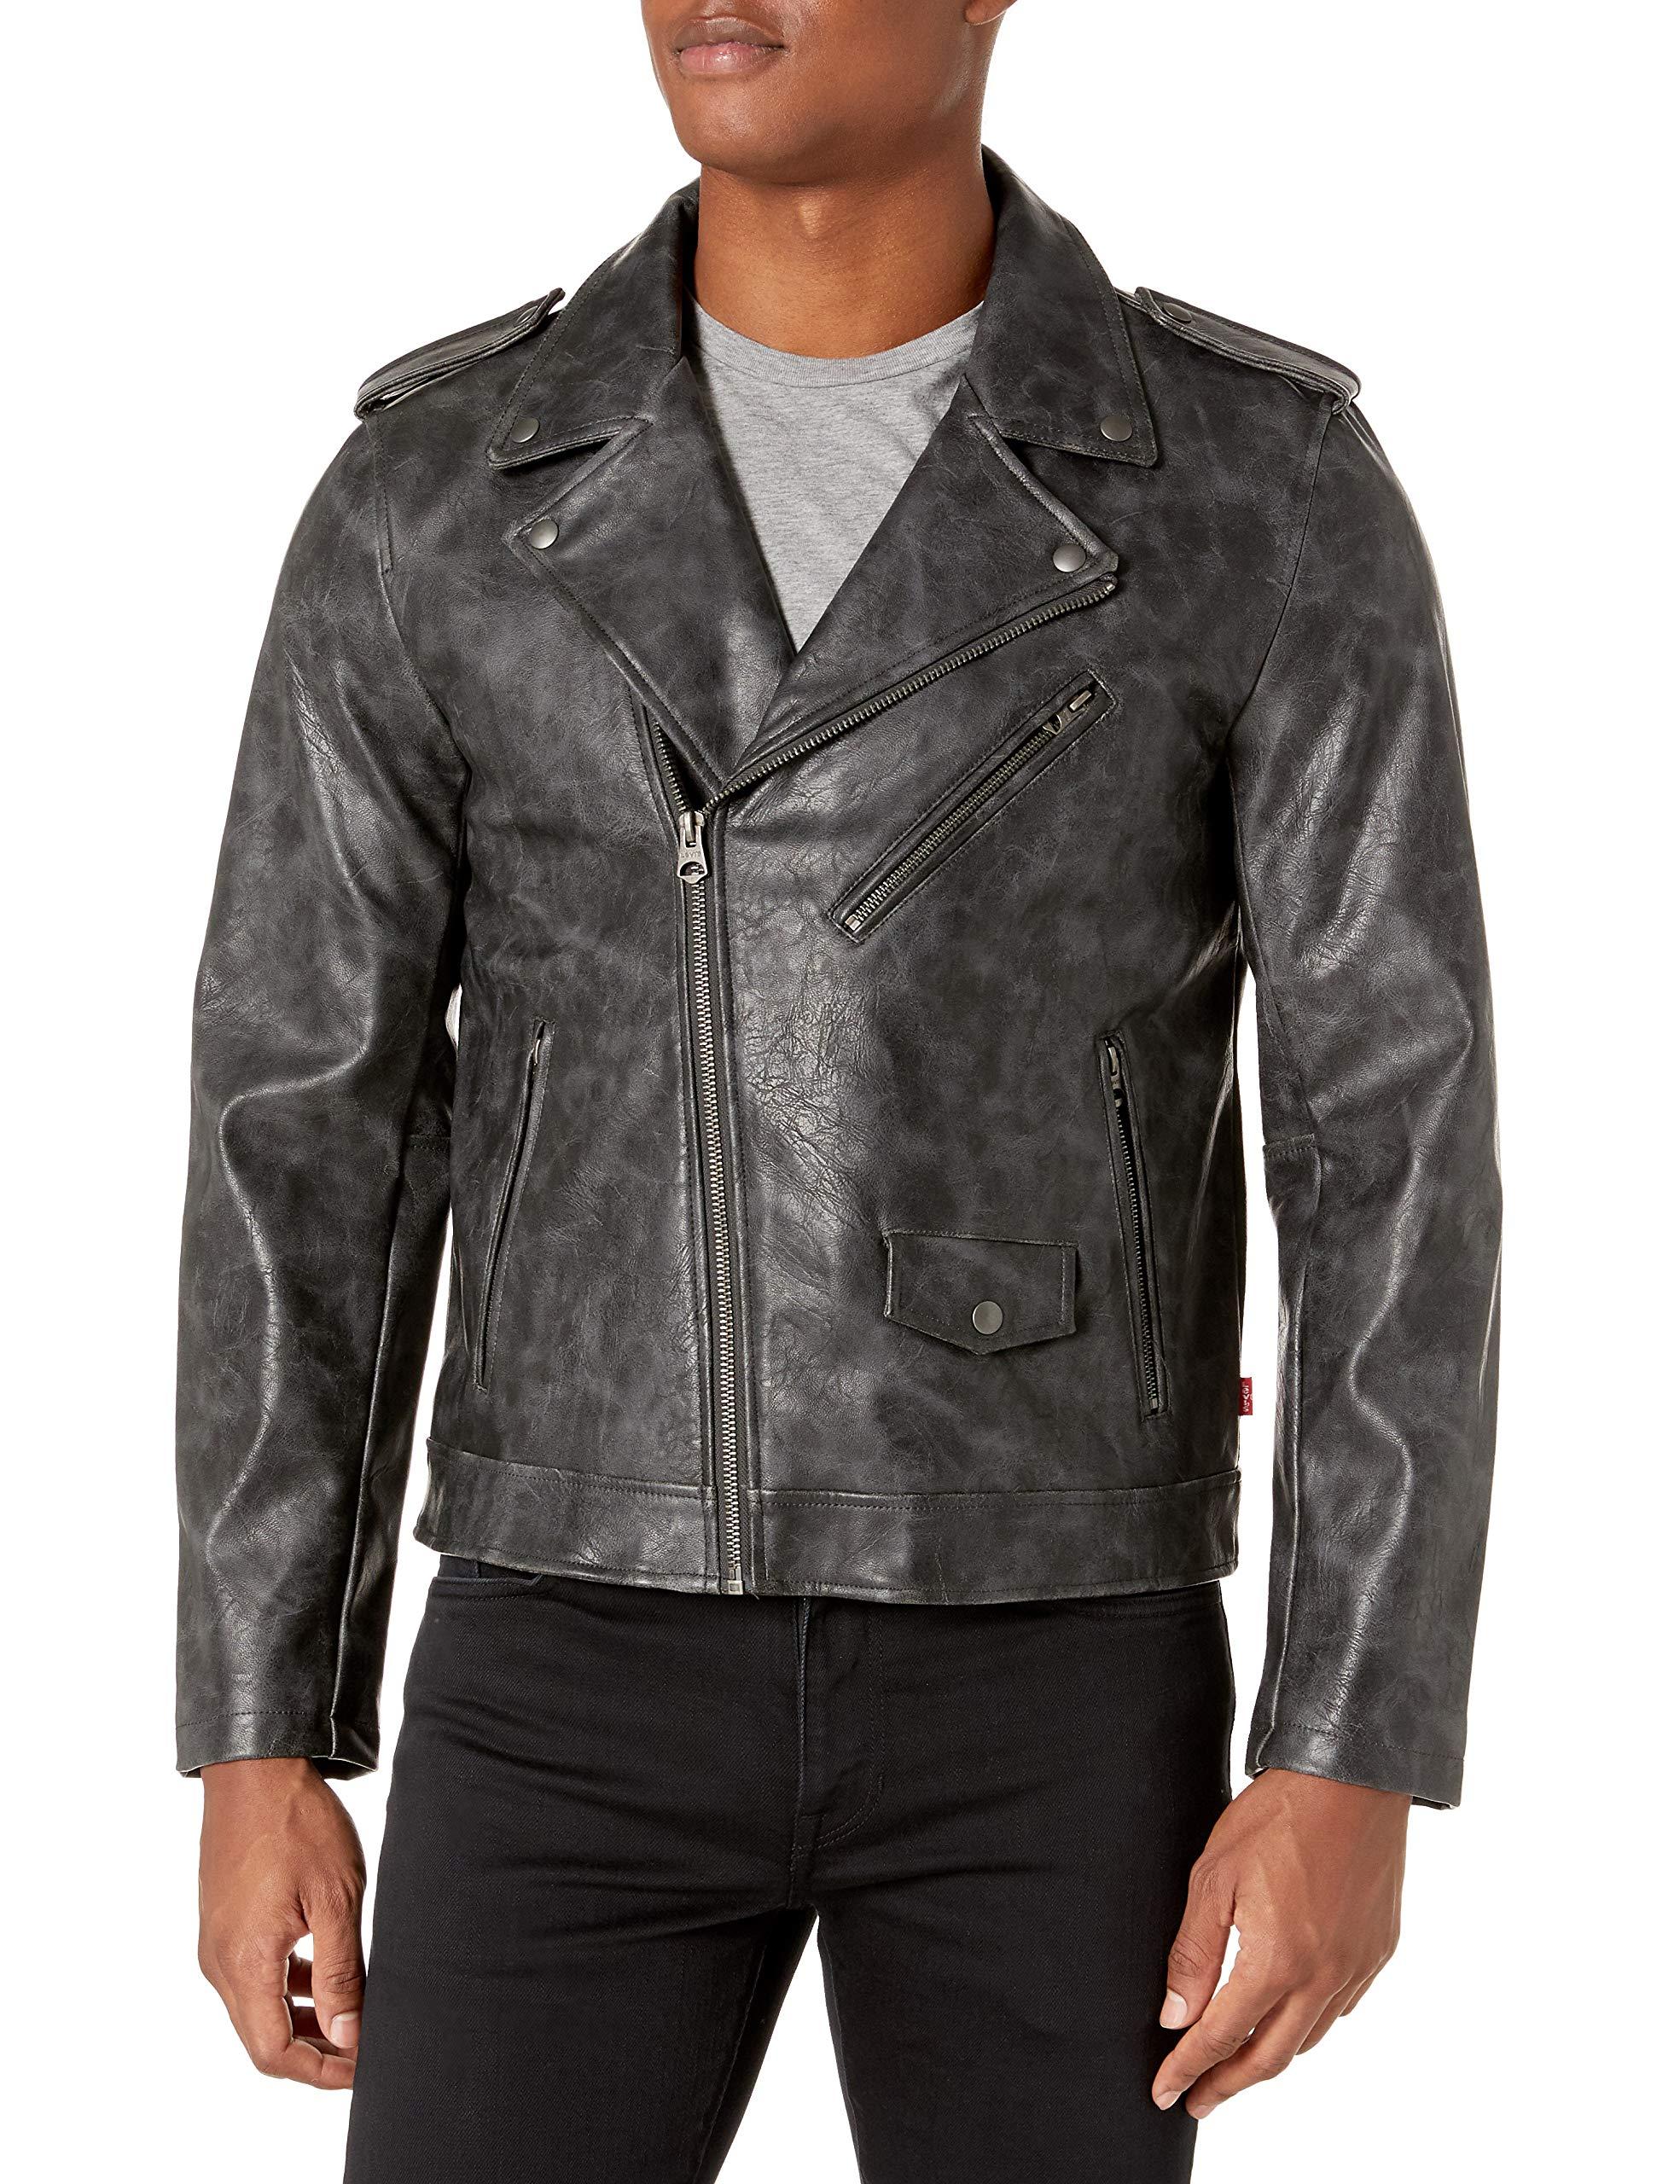 Levi's Faux Leather Motorcycle Jacket in Black for Men - Lyst